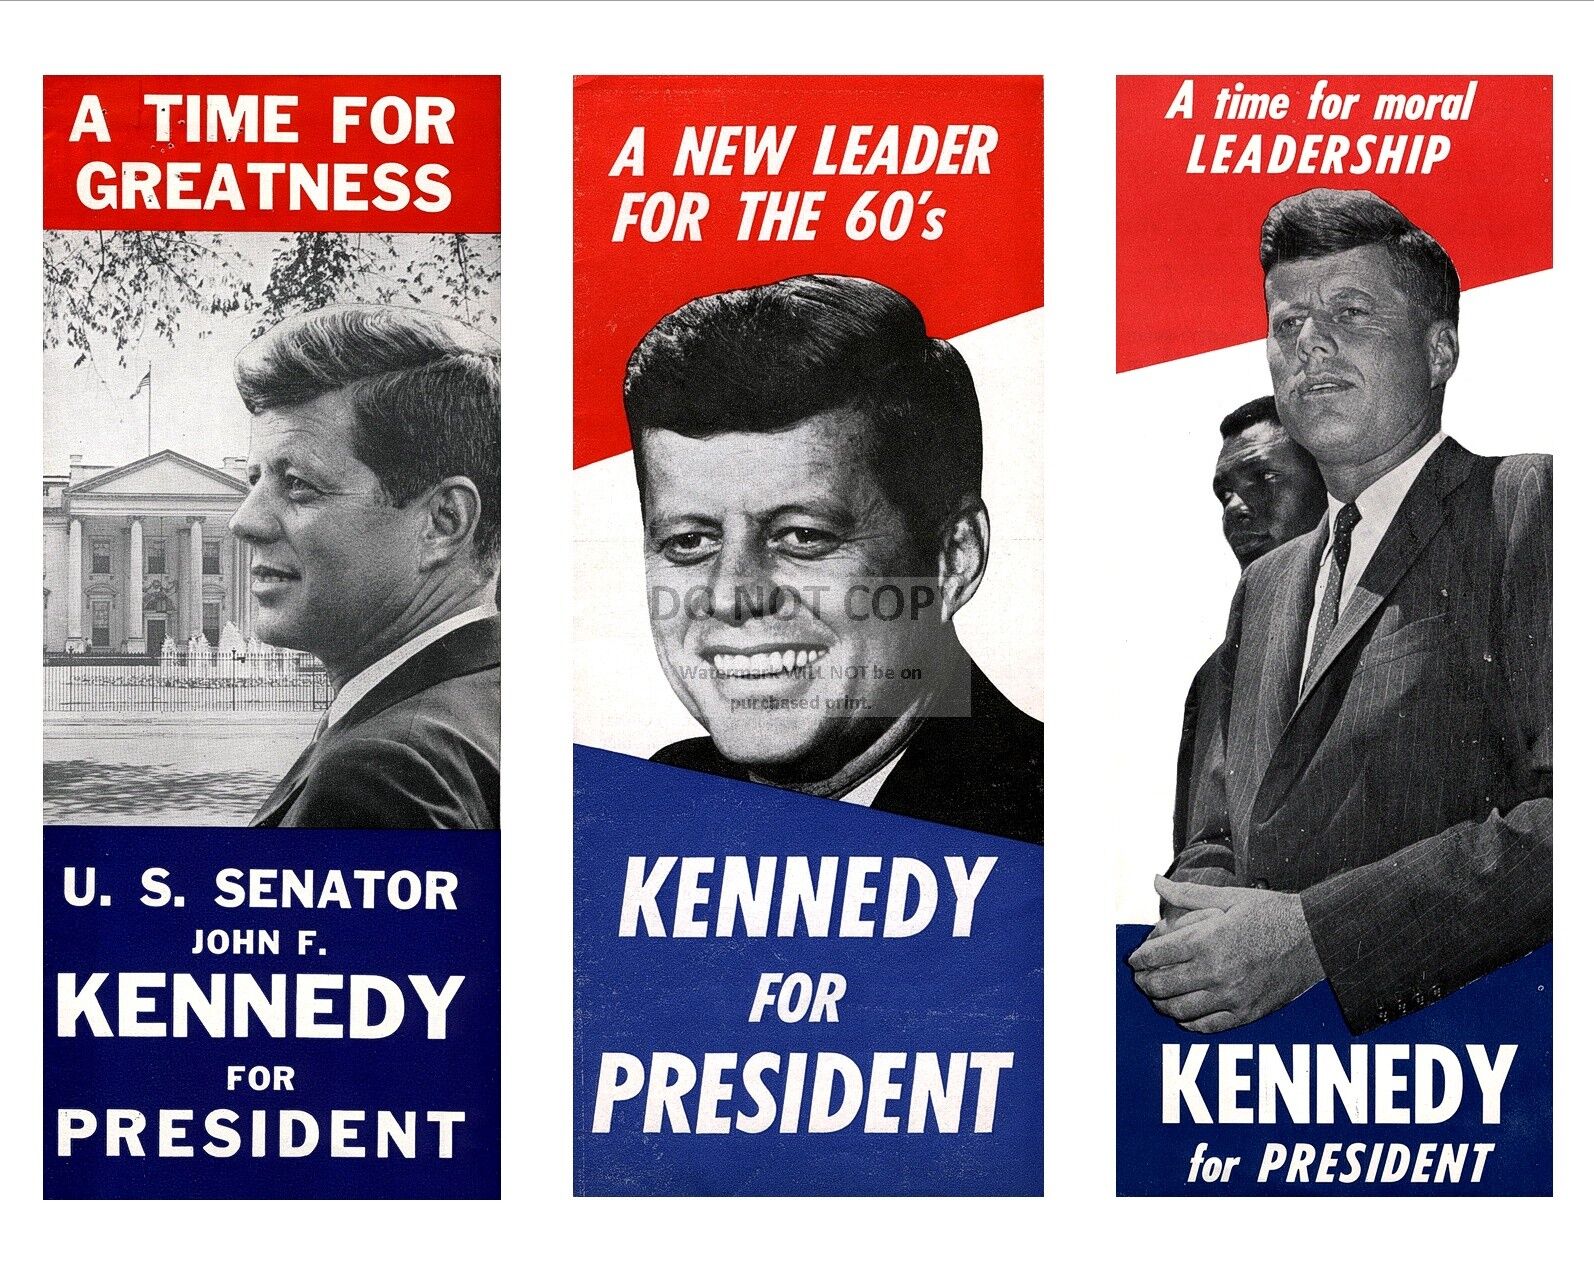 JOHN F. KENNEDY PRESIDENTIAL CAMPAIGN POSTERS 3 ON 1 PRINT - 8X10 PHOTO (ZY-221)